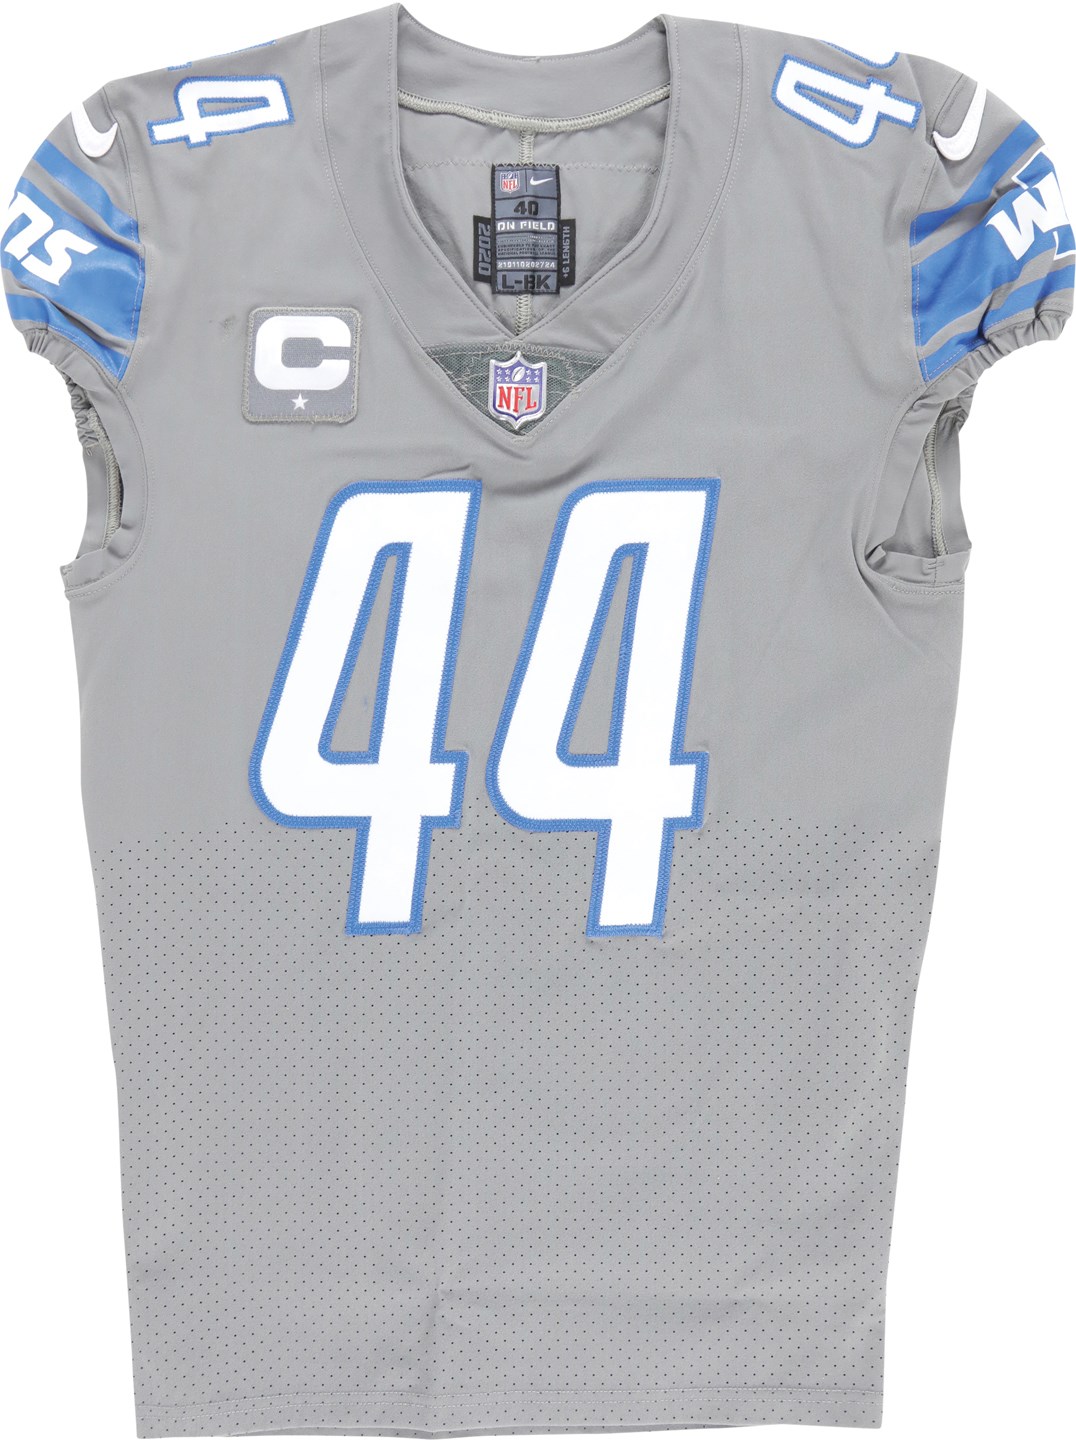 Football - 9/26/21 Jalen Reeves-Maybin Detroit Lions "Color Rush" Game Worn Jersey (Photo-Matched)